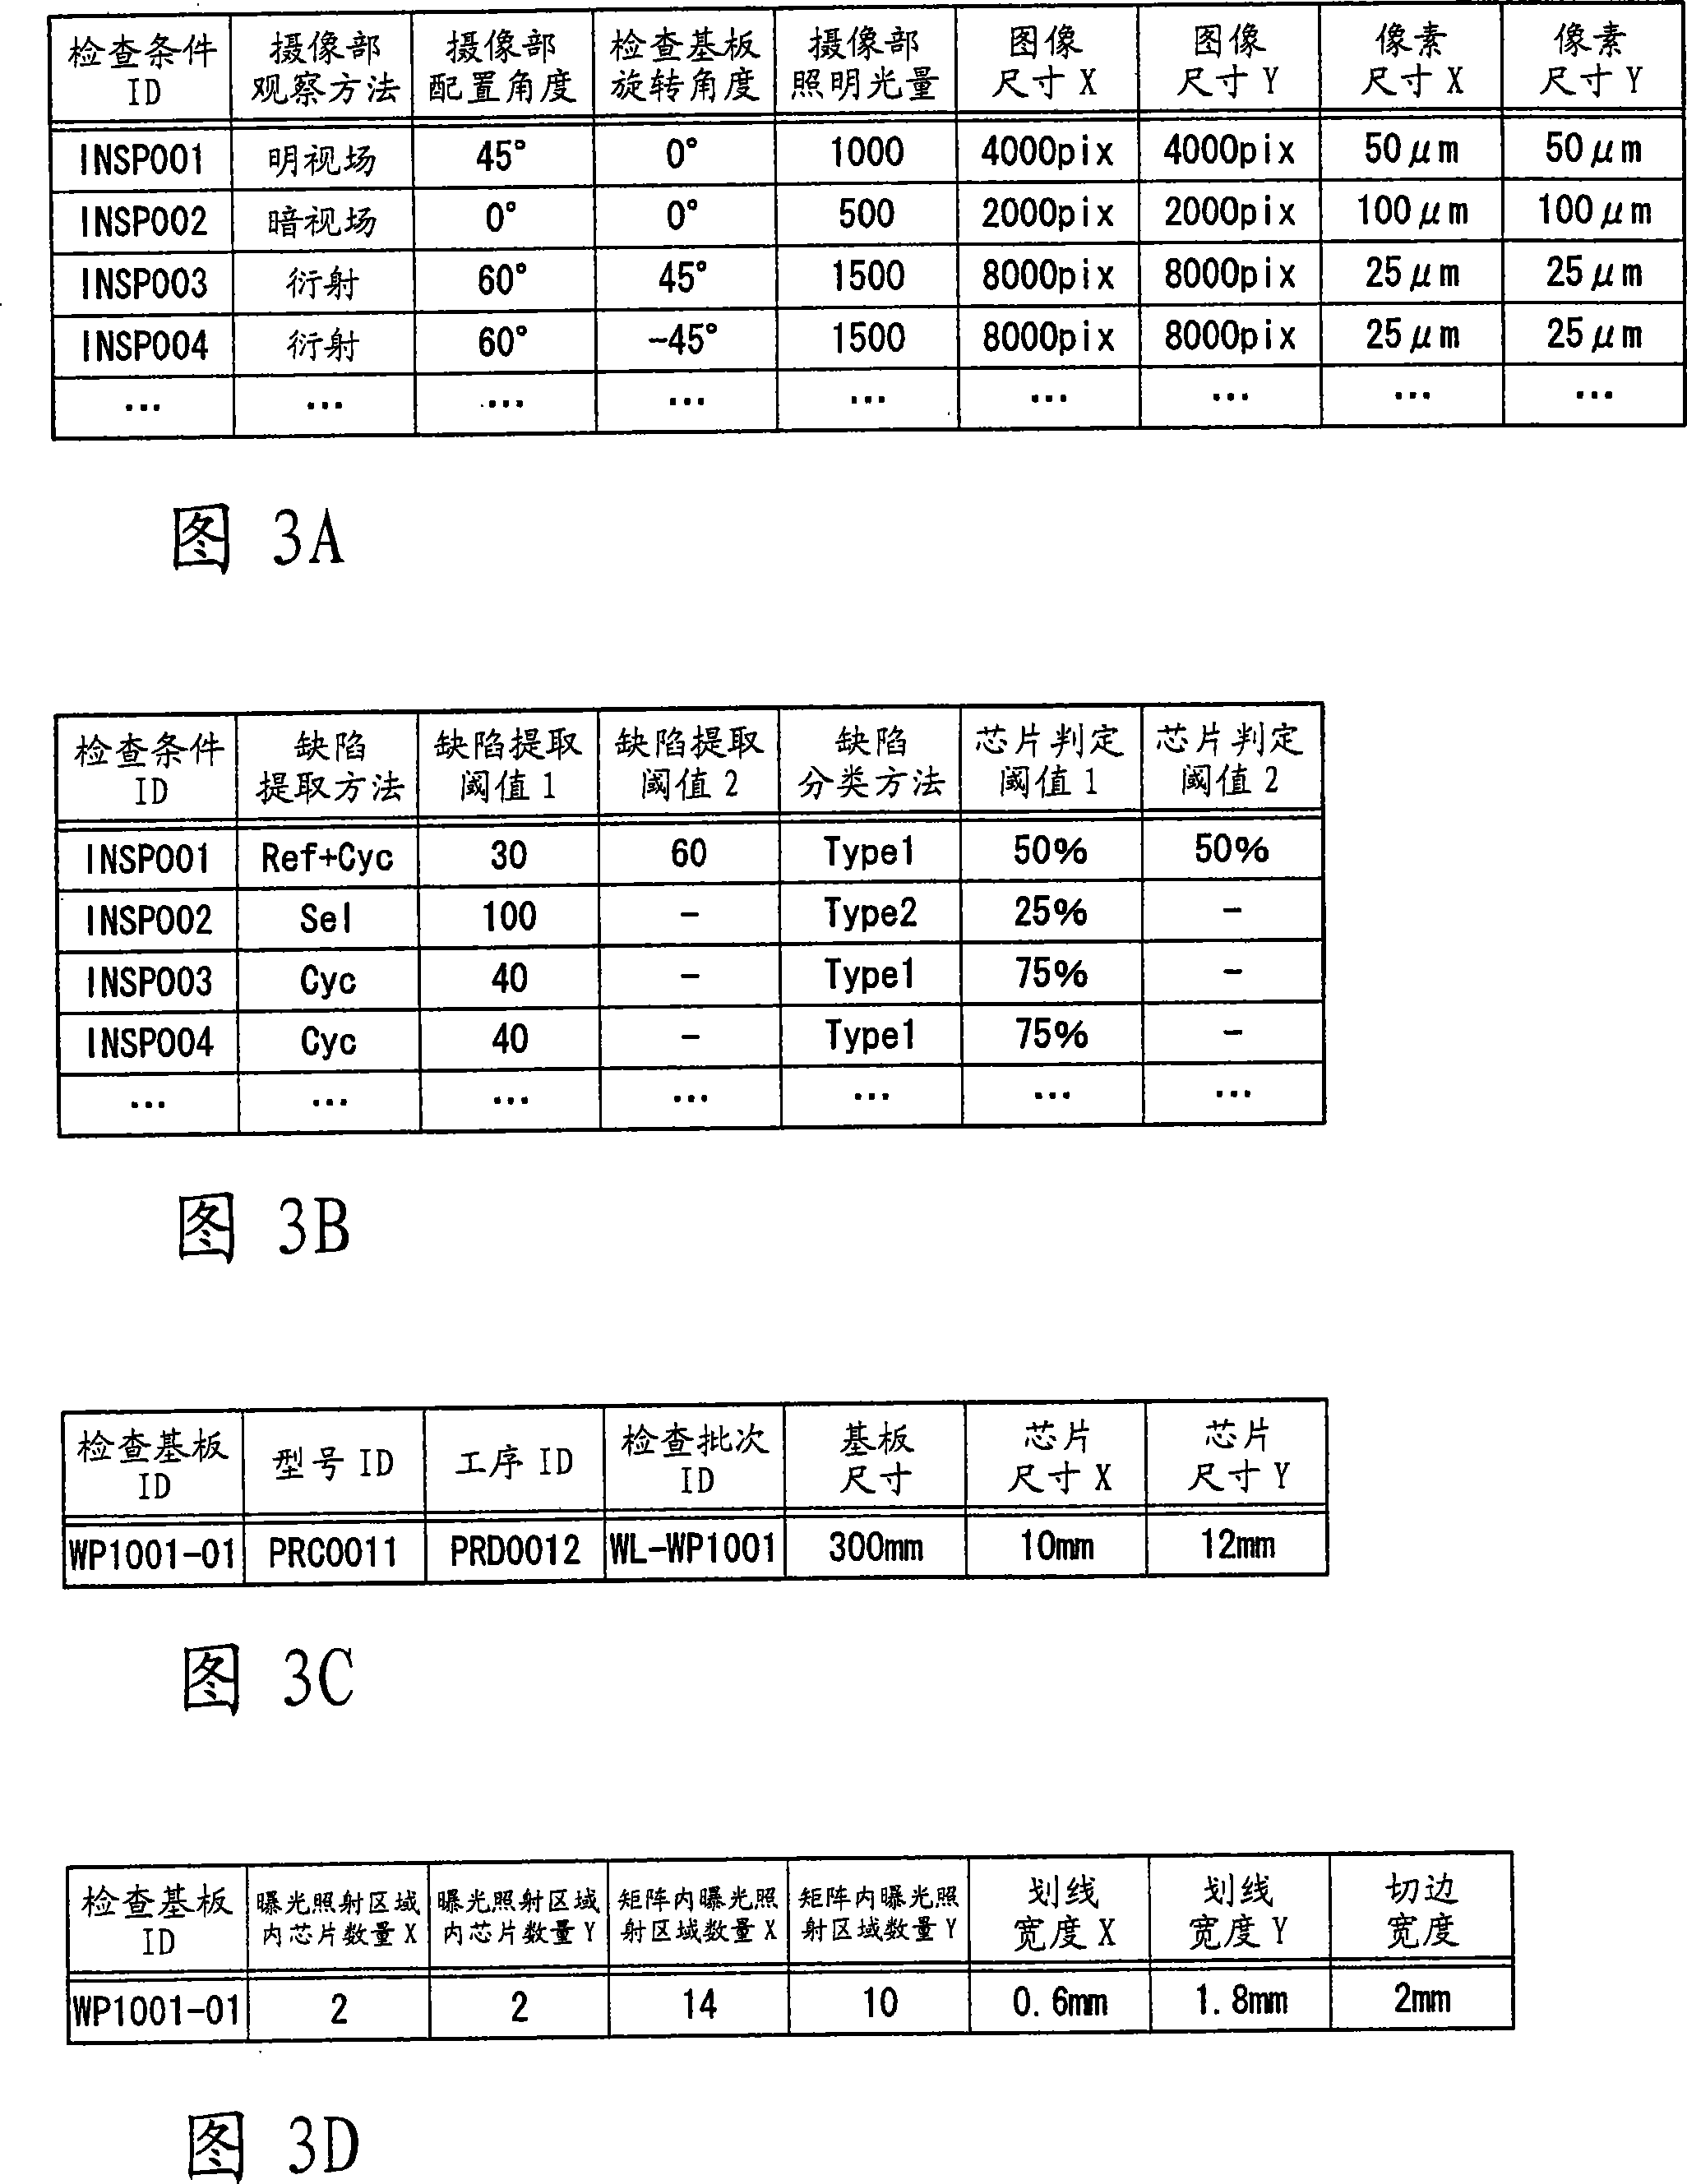 Defect testing device and method